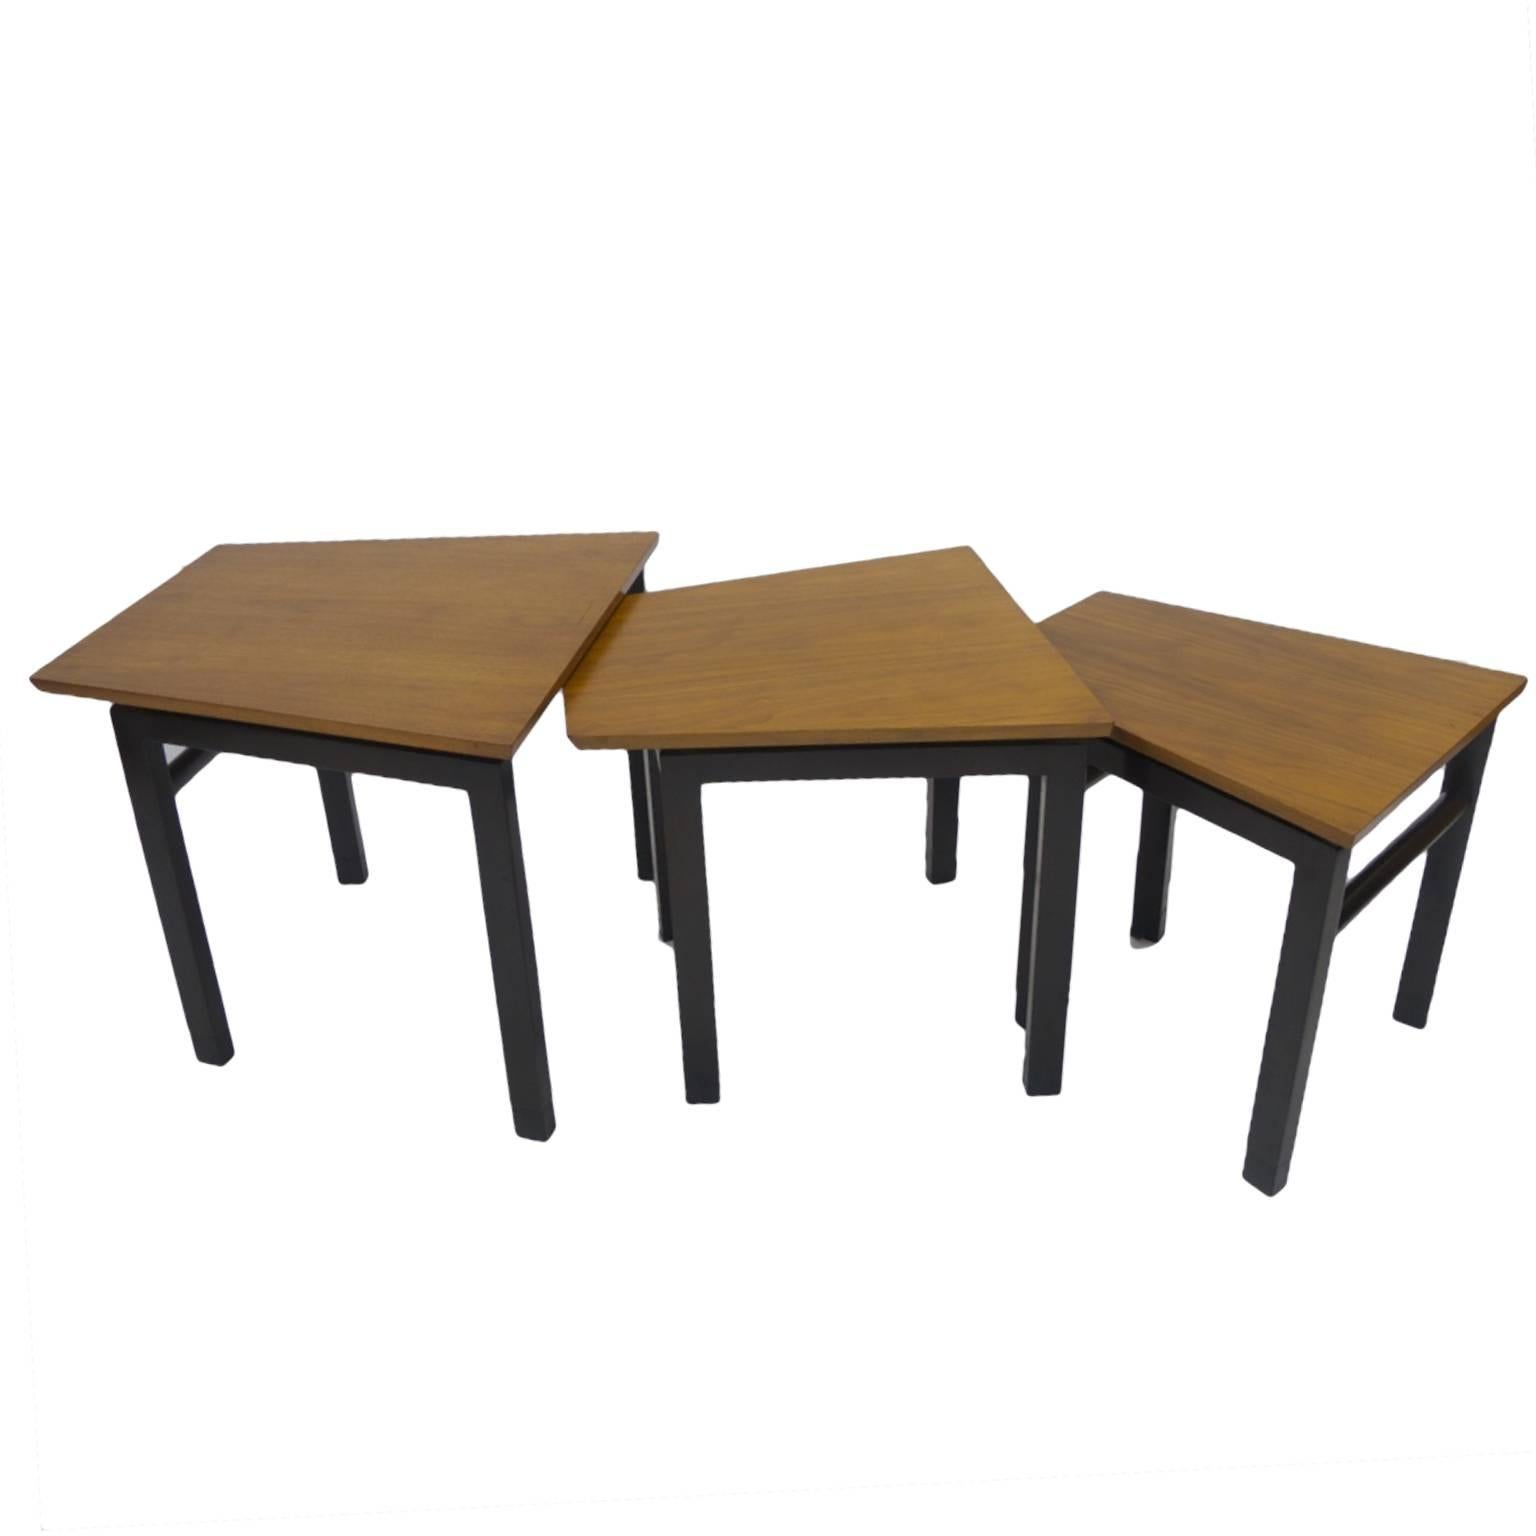 Stunning set of three sturdy trapezoid shaped nesting tables designed by Edward Wormley for Dunbar. Tops are constructed of walnut with a beautifully beveled edge for a streamlined look. Bases have an ebonized finish and each leg is capped with a